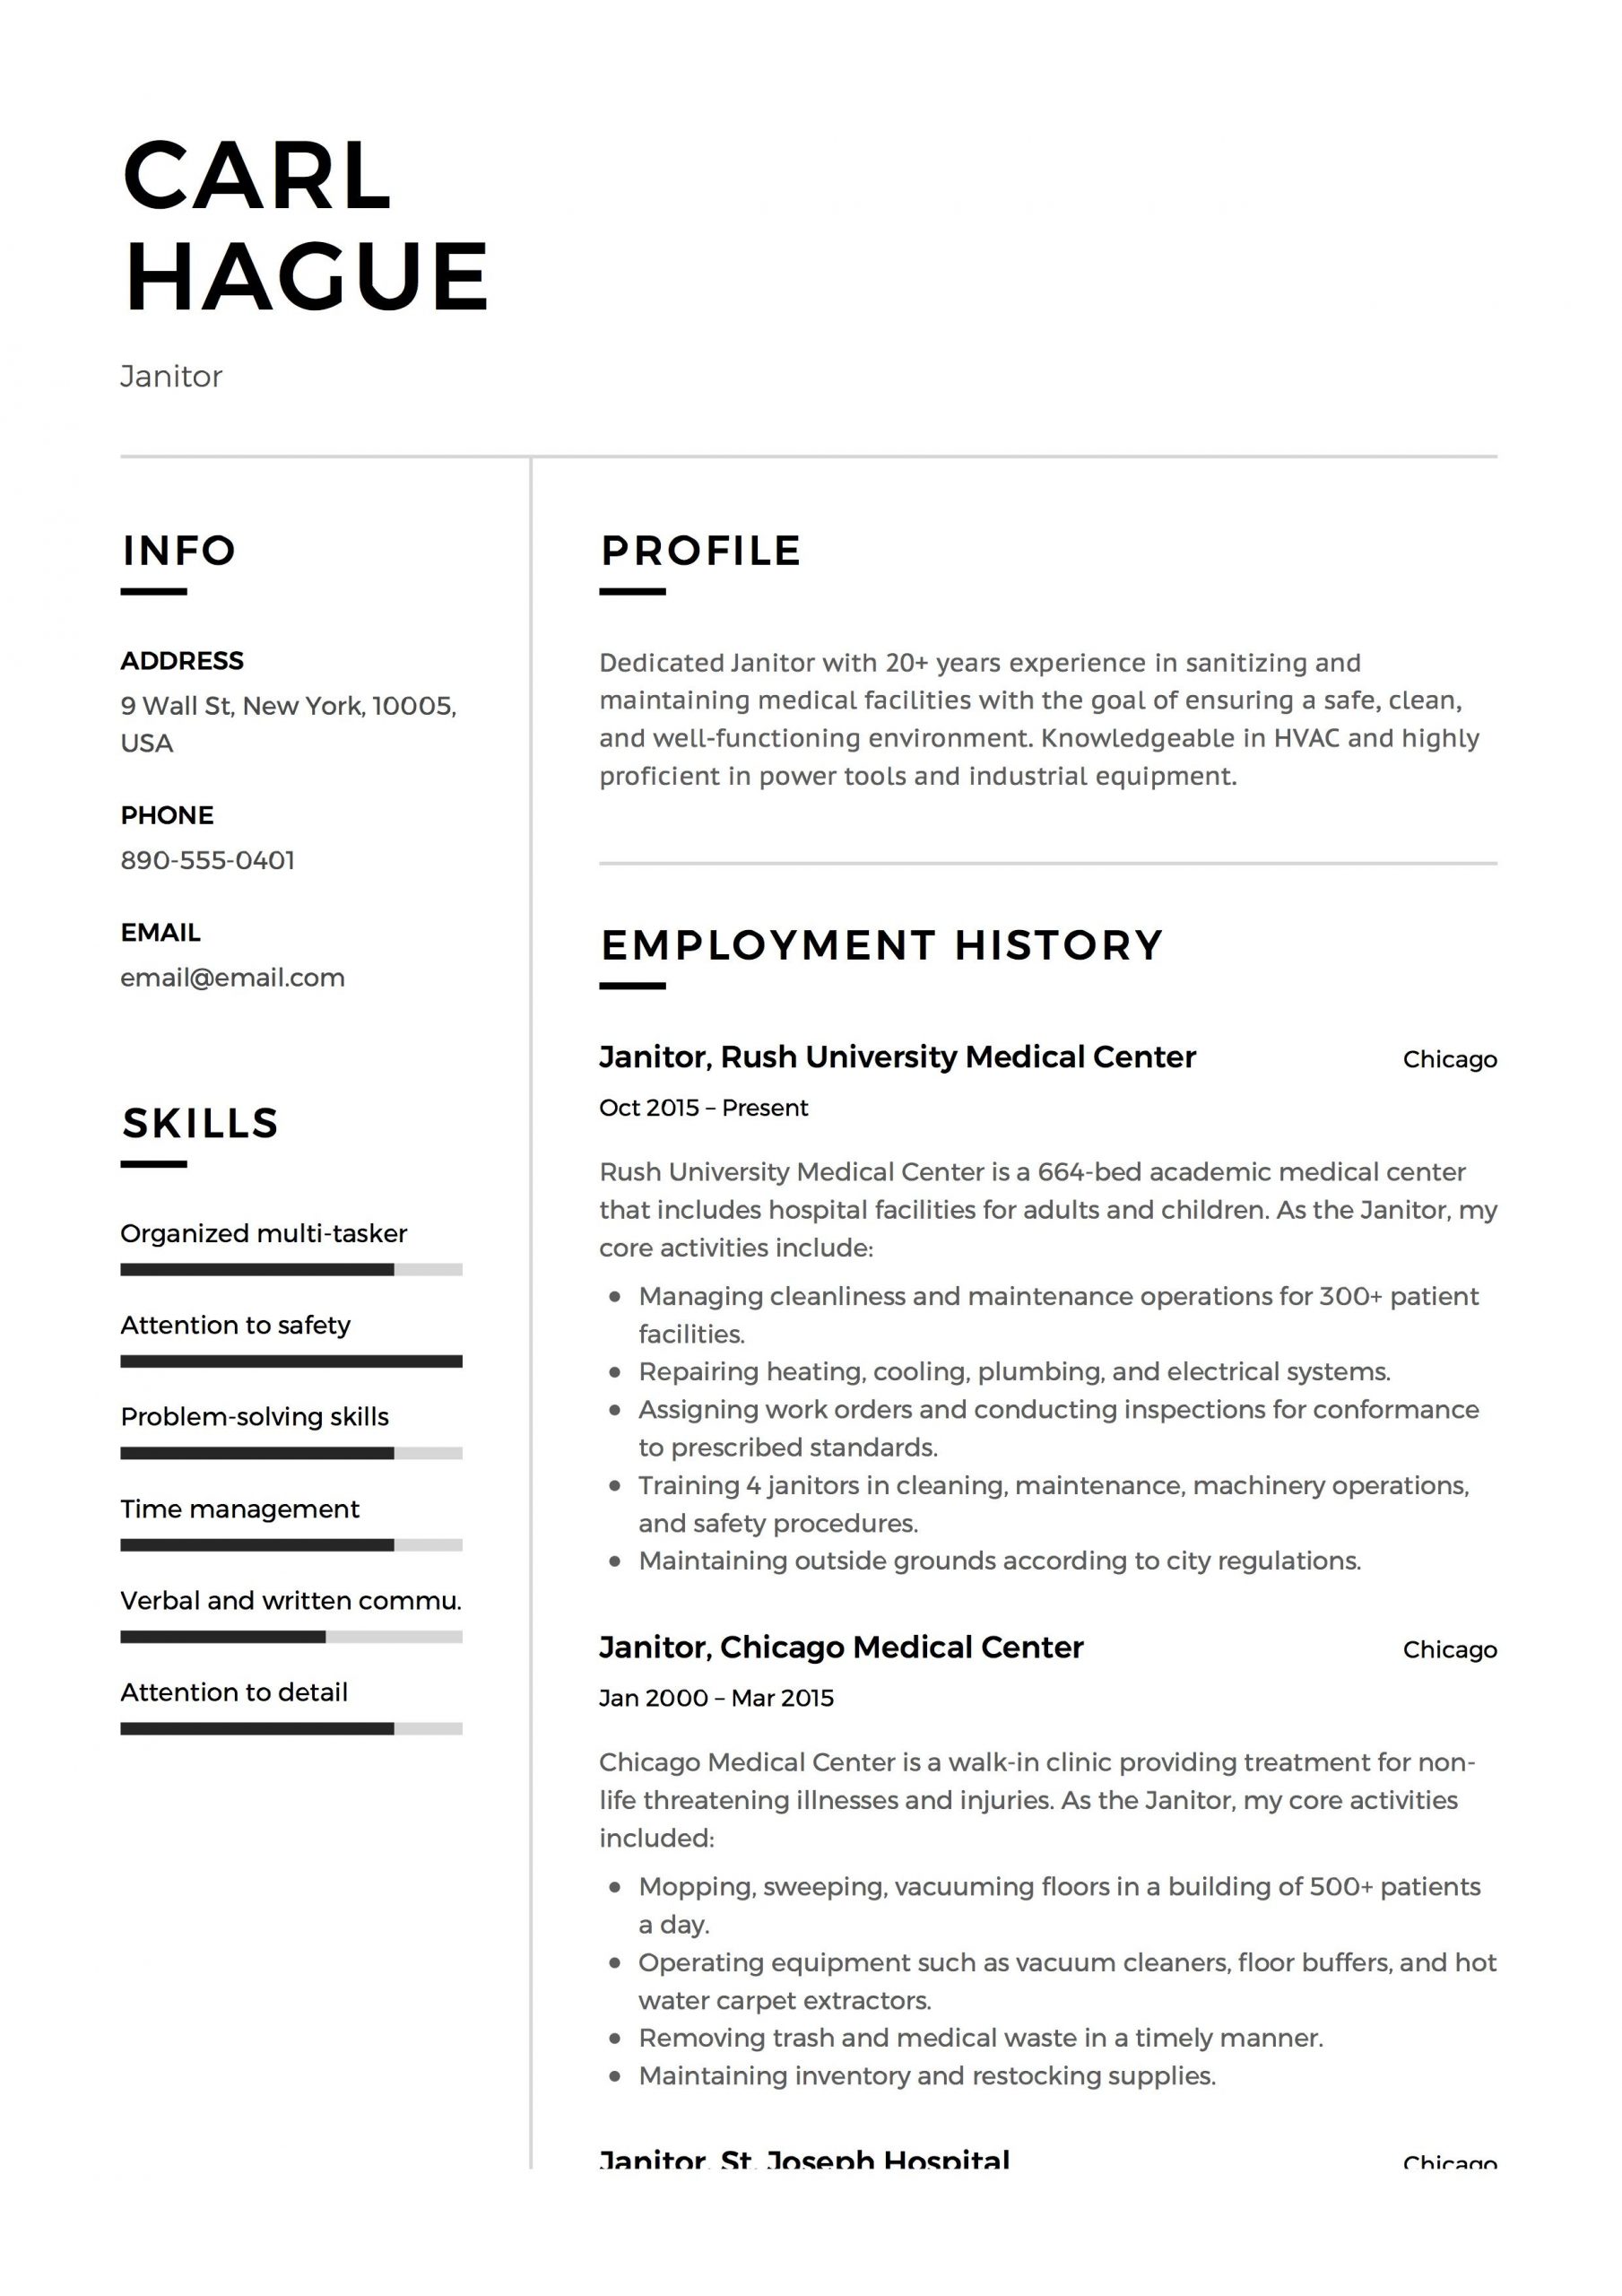 Janitor Resume Writing Guide With Images Resume within proportions 2479 X 3508